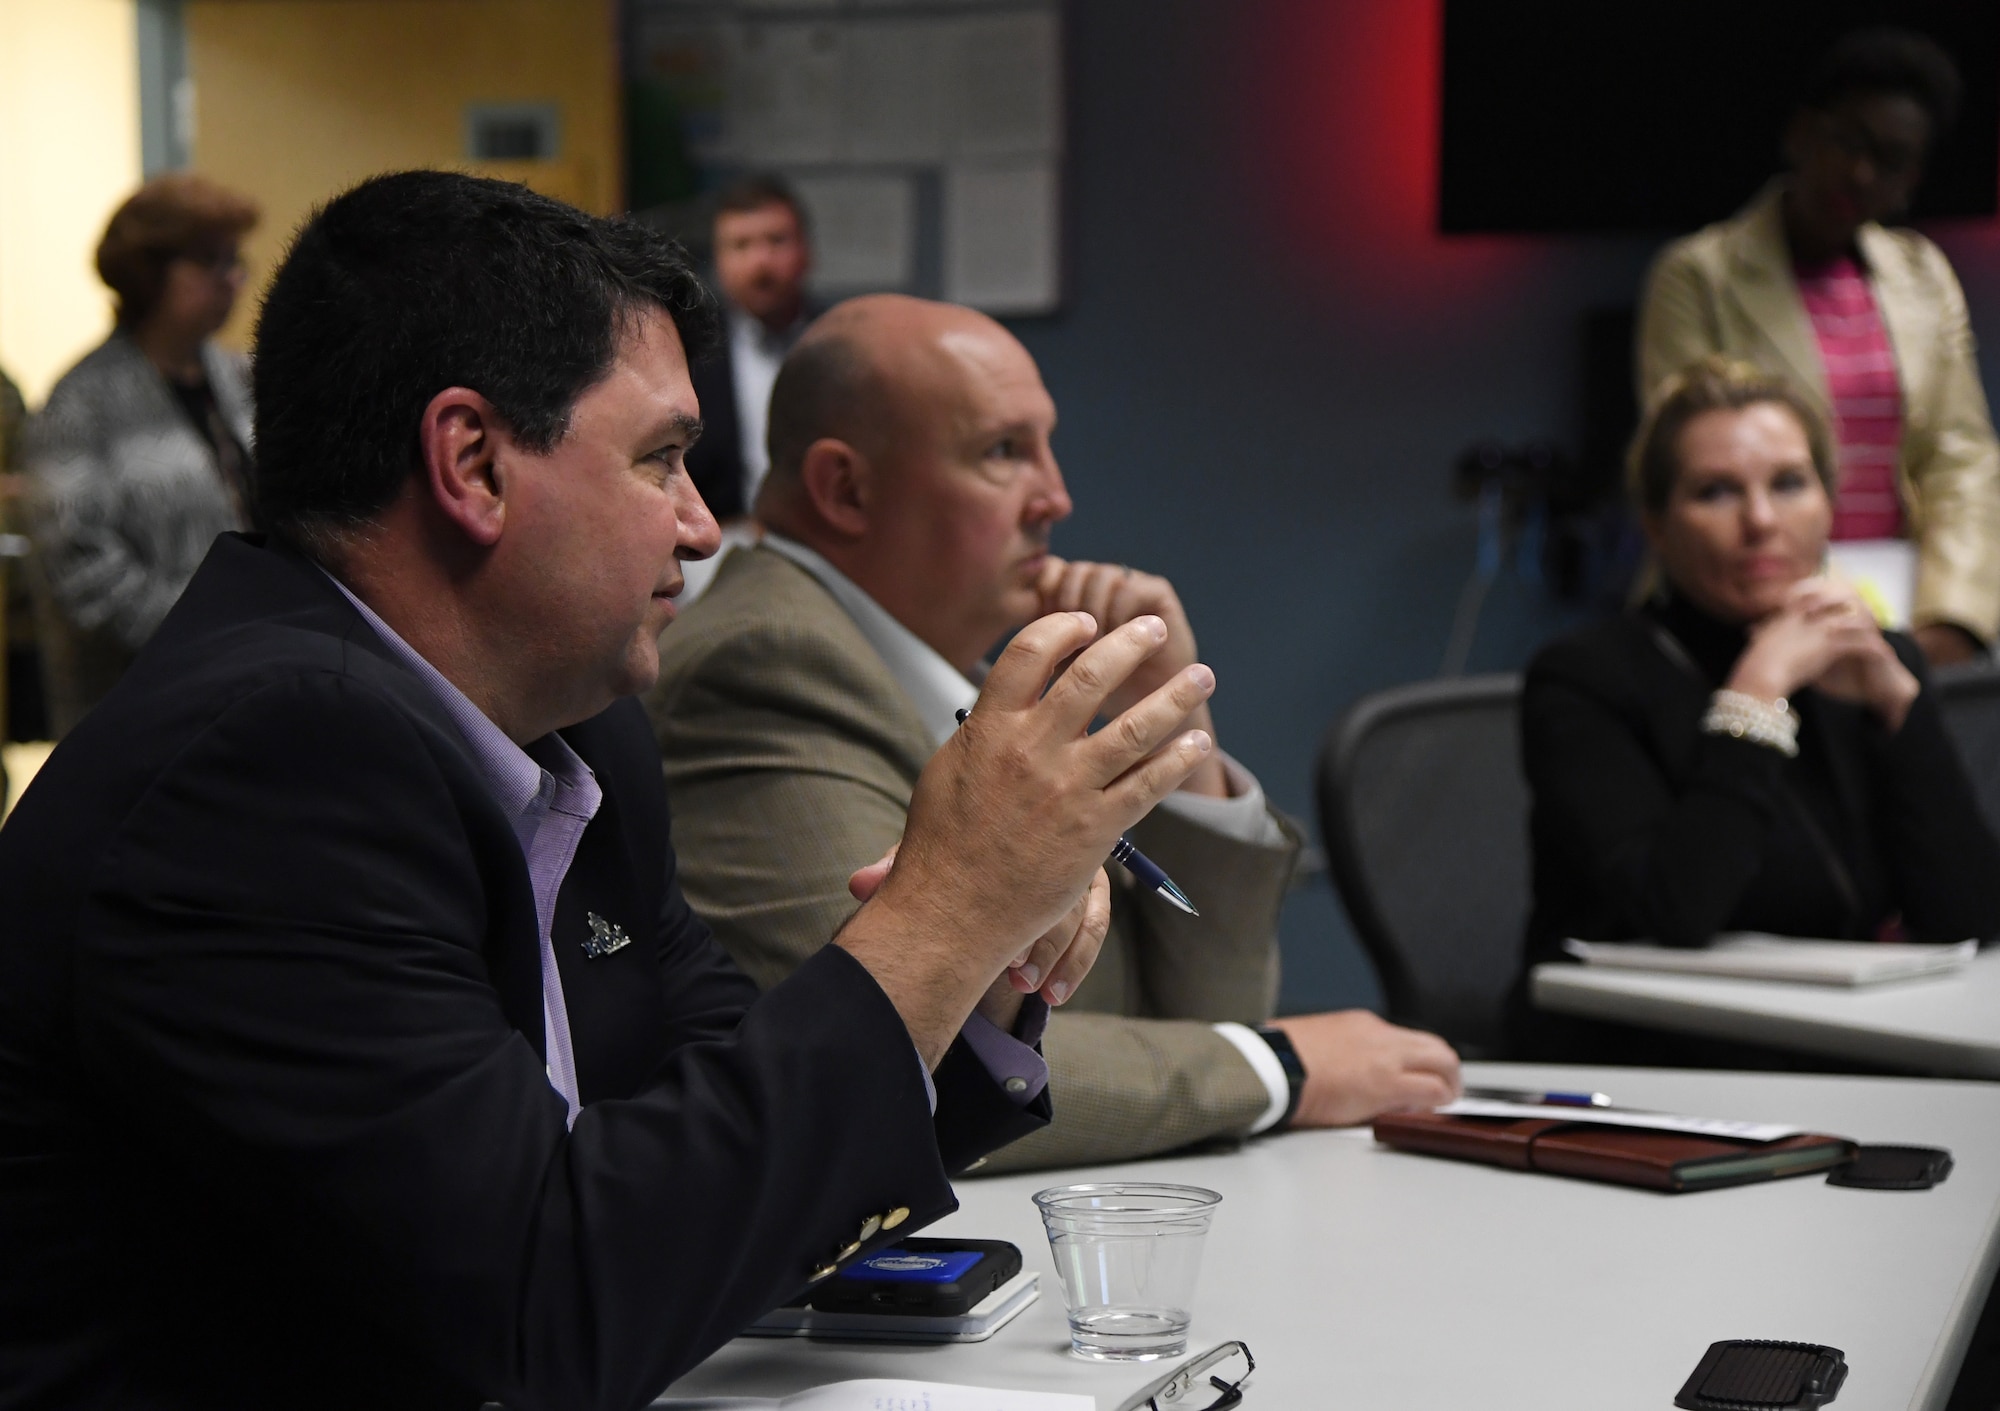 Peter Abide, Biloxi, Mississippi, city attorney, asks questions during a brief on imaginary surfaces during the airspace sustainability tour inside Cody Hall at Keesler Air Force Base, Mississippi, Jan. 23, 2019. Keesler hosted the community engagement for civic leaders to discuss Keesler's flying mission requirements in order to create processes which informs key decision makers regarding local development and to ensure compatible economic growth for the surrounding communities. (U.S. Air Force photo by Kemberly Groue)